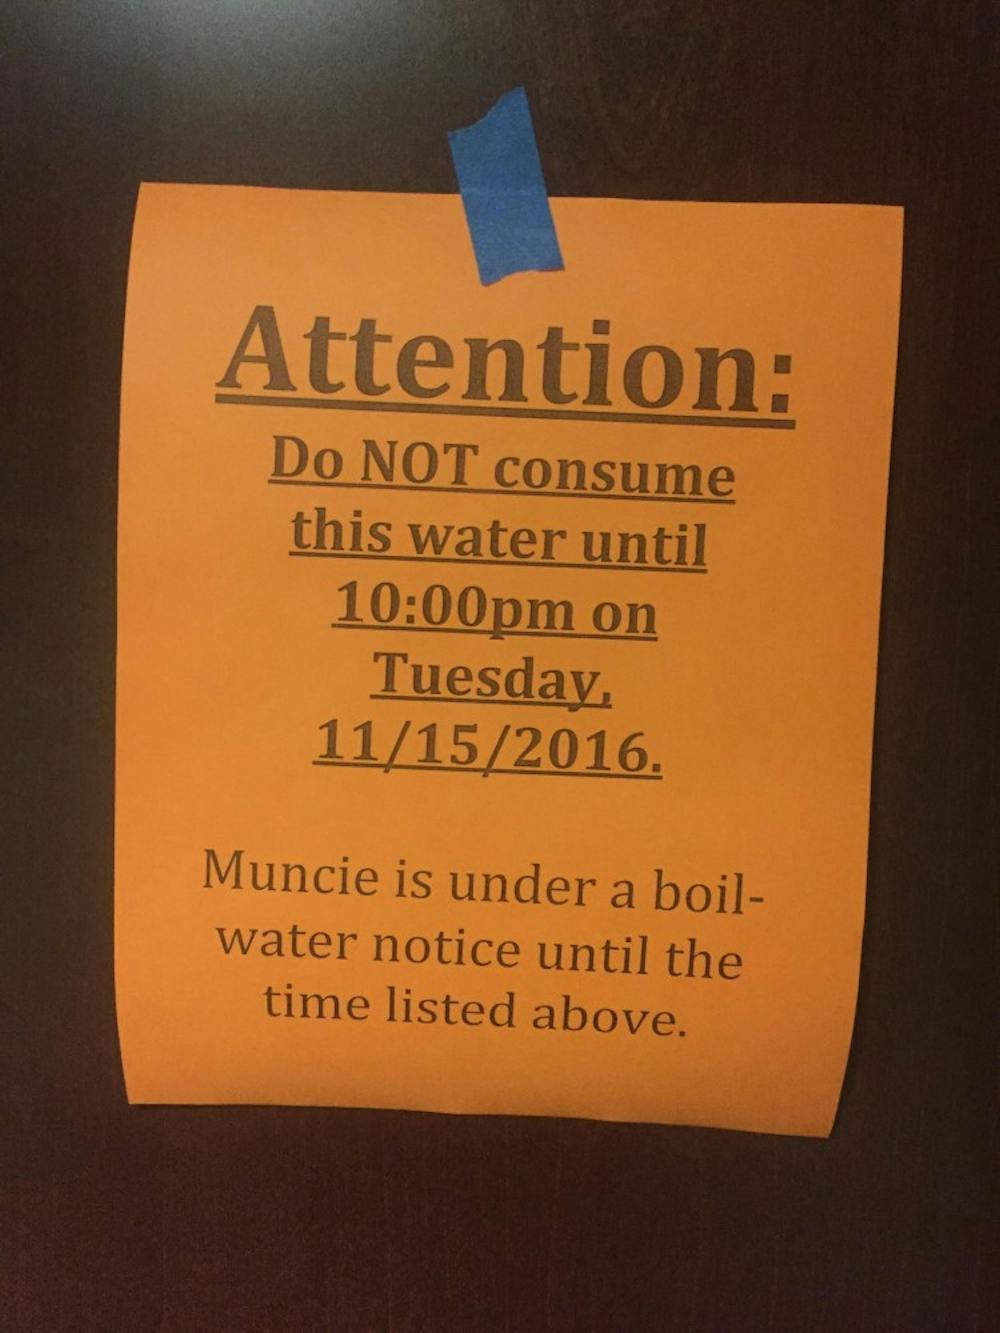 A flier was posted within residence halls on Ball State's campus in order to inform residents of the 24-hour&nbsp;boil notice issued on Nov. 14. Many worried about lead contamination, like in Flint, Michigan, but&nbsp;Muncie's water supply is now safe to consume.&nbsp;Provided Photo